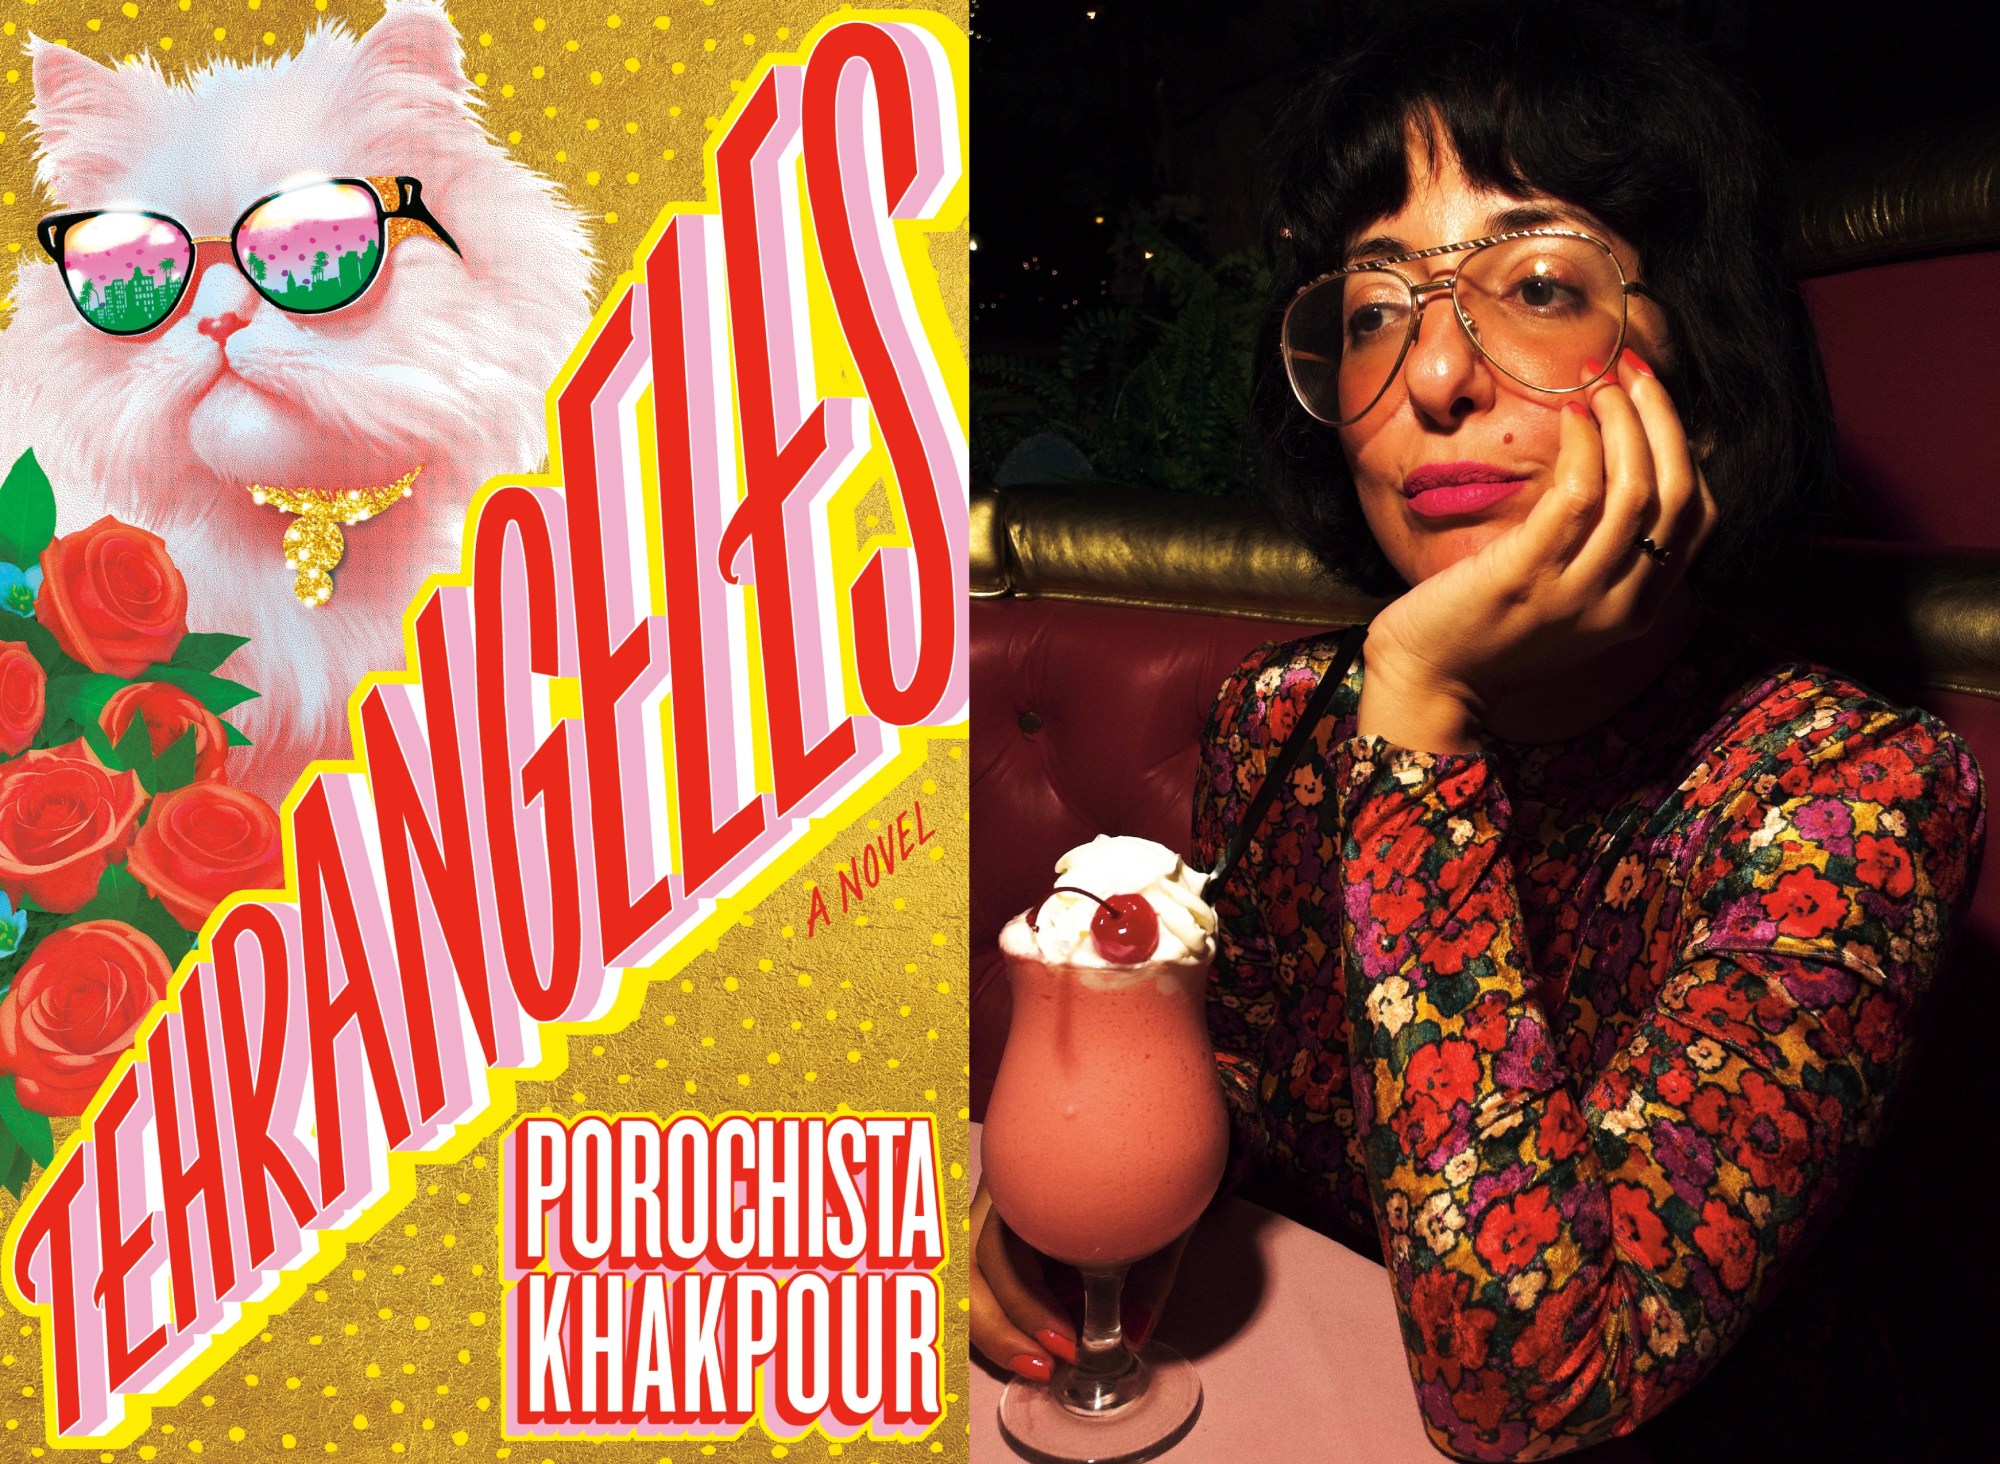 San Gabriel Valley-raised author Porochista Khakpour describes the process of writing her new novel, "Tehrangeles," which is set in a wealthy section of L.A. (Courtesy of Pantheon)